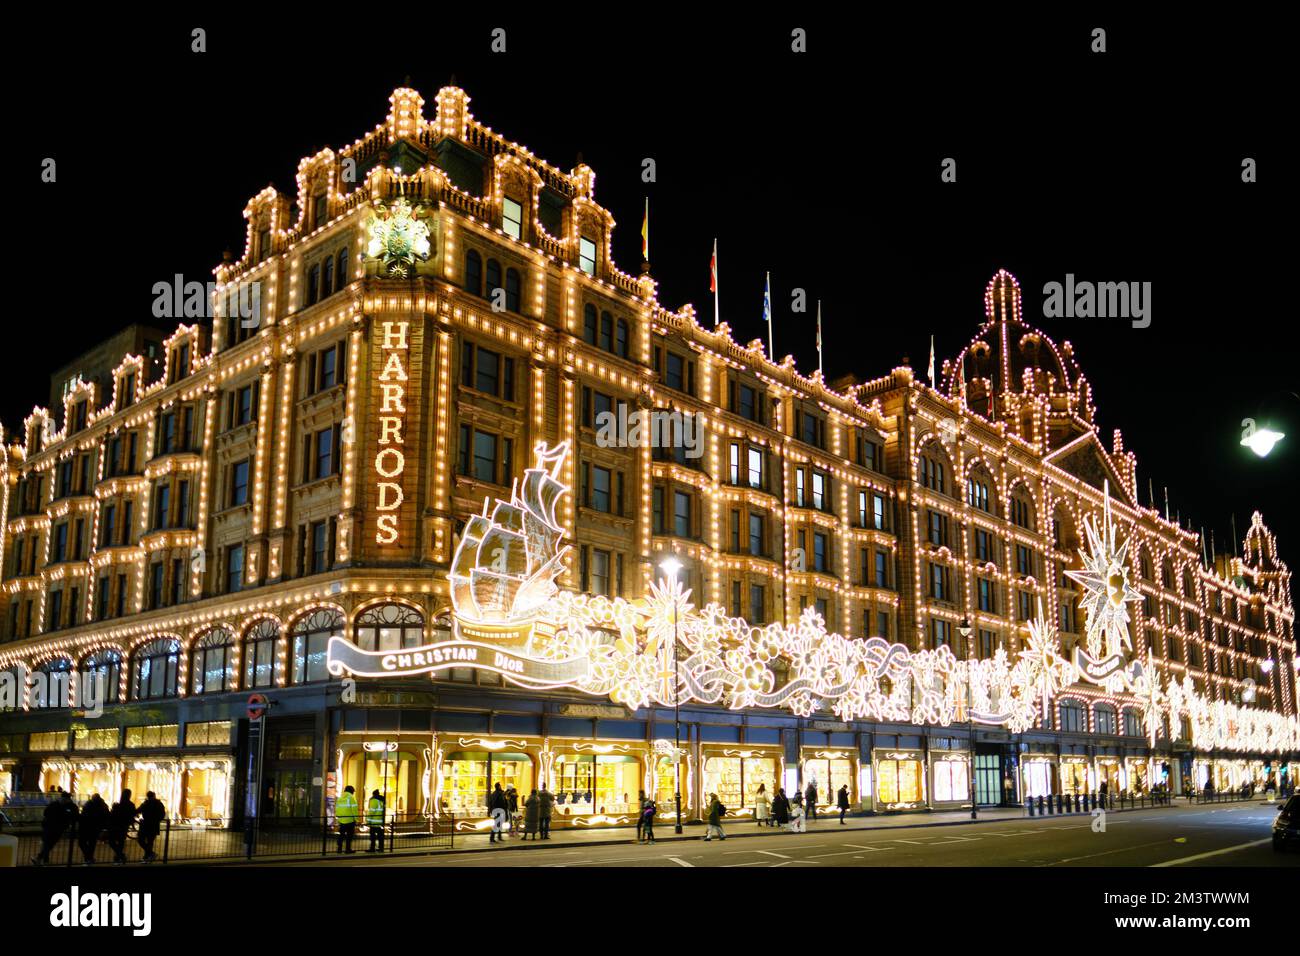 Harrods luxury department store with Christmas decorations at ...